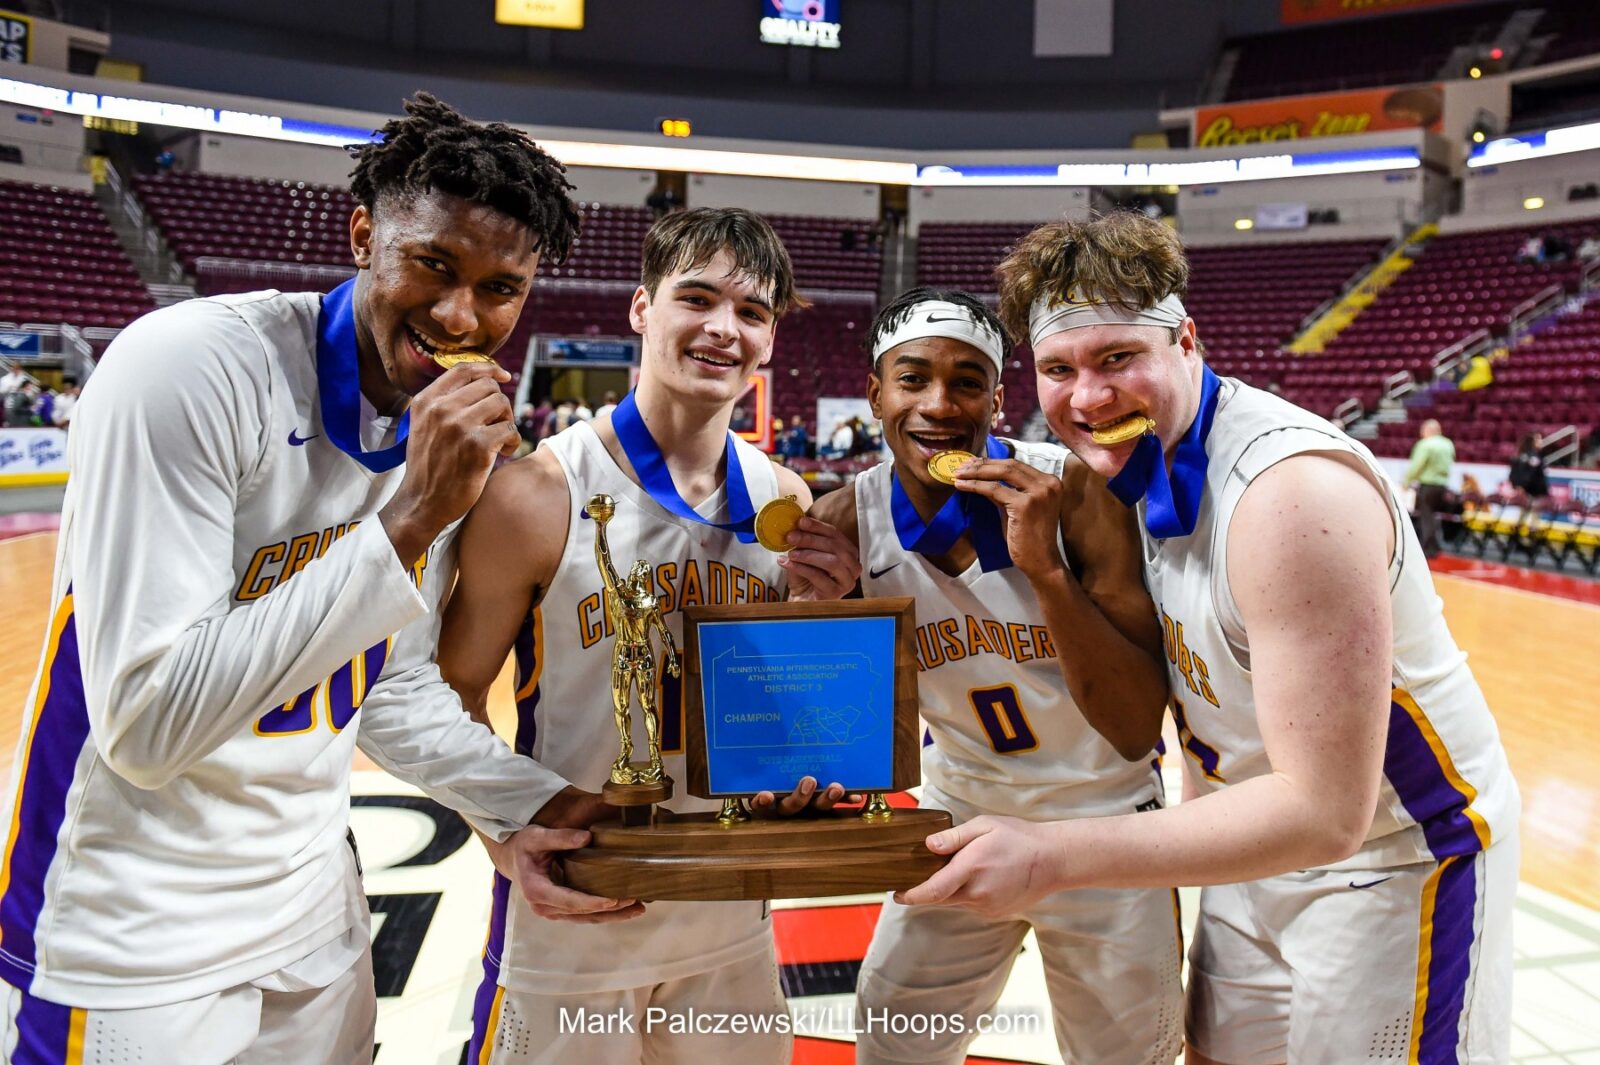 Crusaders Return To Gold Standard As Kamwanga’s Last-Second Shot Vaults Lancaster Catholic Past Bishop McDevitt In District 3-4A Title Game